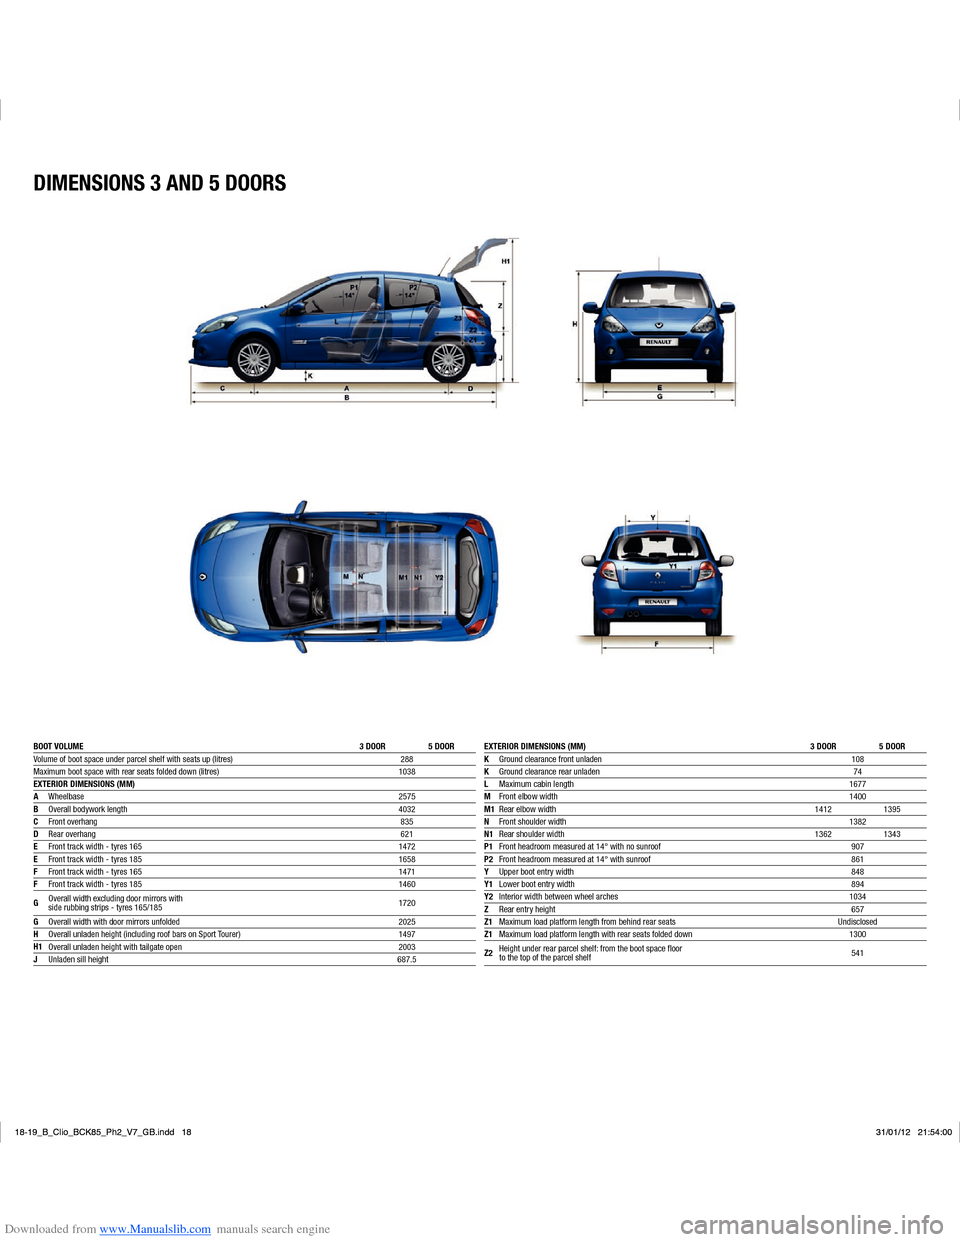 RENAULT CLIO 2012 X85 / 3.G User Guide Downloaded from www.Manualslib.com manuals search engine DIMENSIONS 3 AND 5 DOORS
BOOT VOLUME 3 DOOR 5 DOOR
Volume of boot space under parcel shelf with seats up (litres) 288
Maximum boot space with r